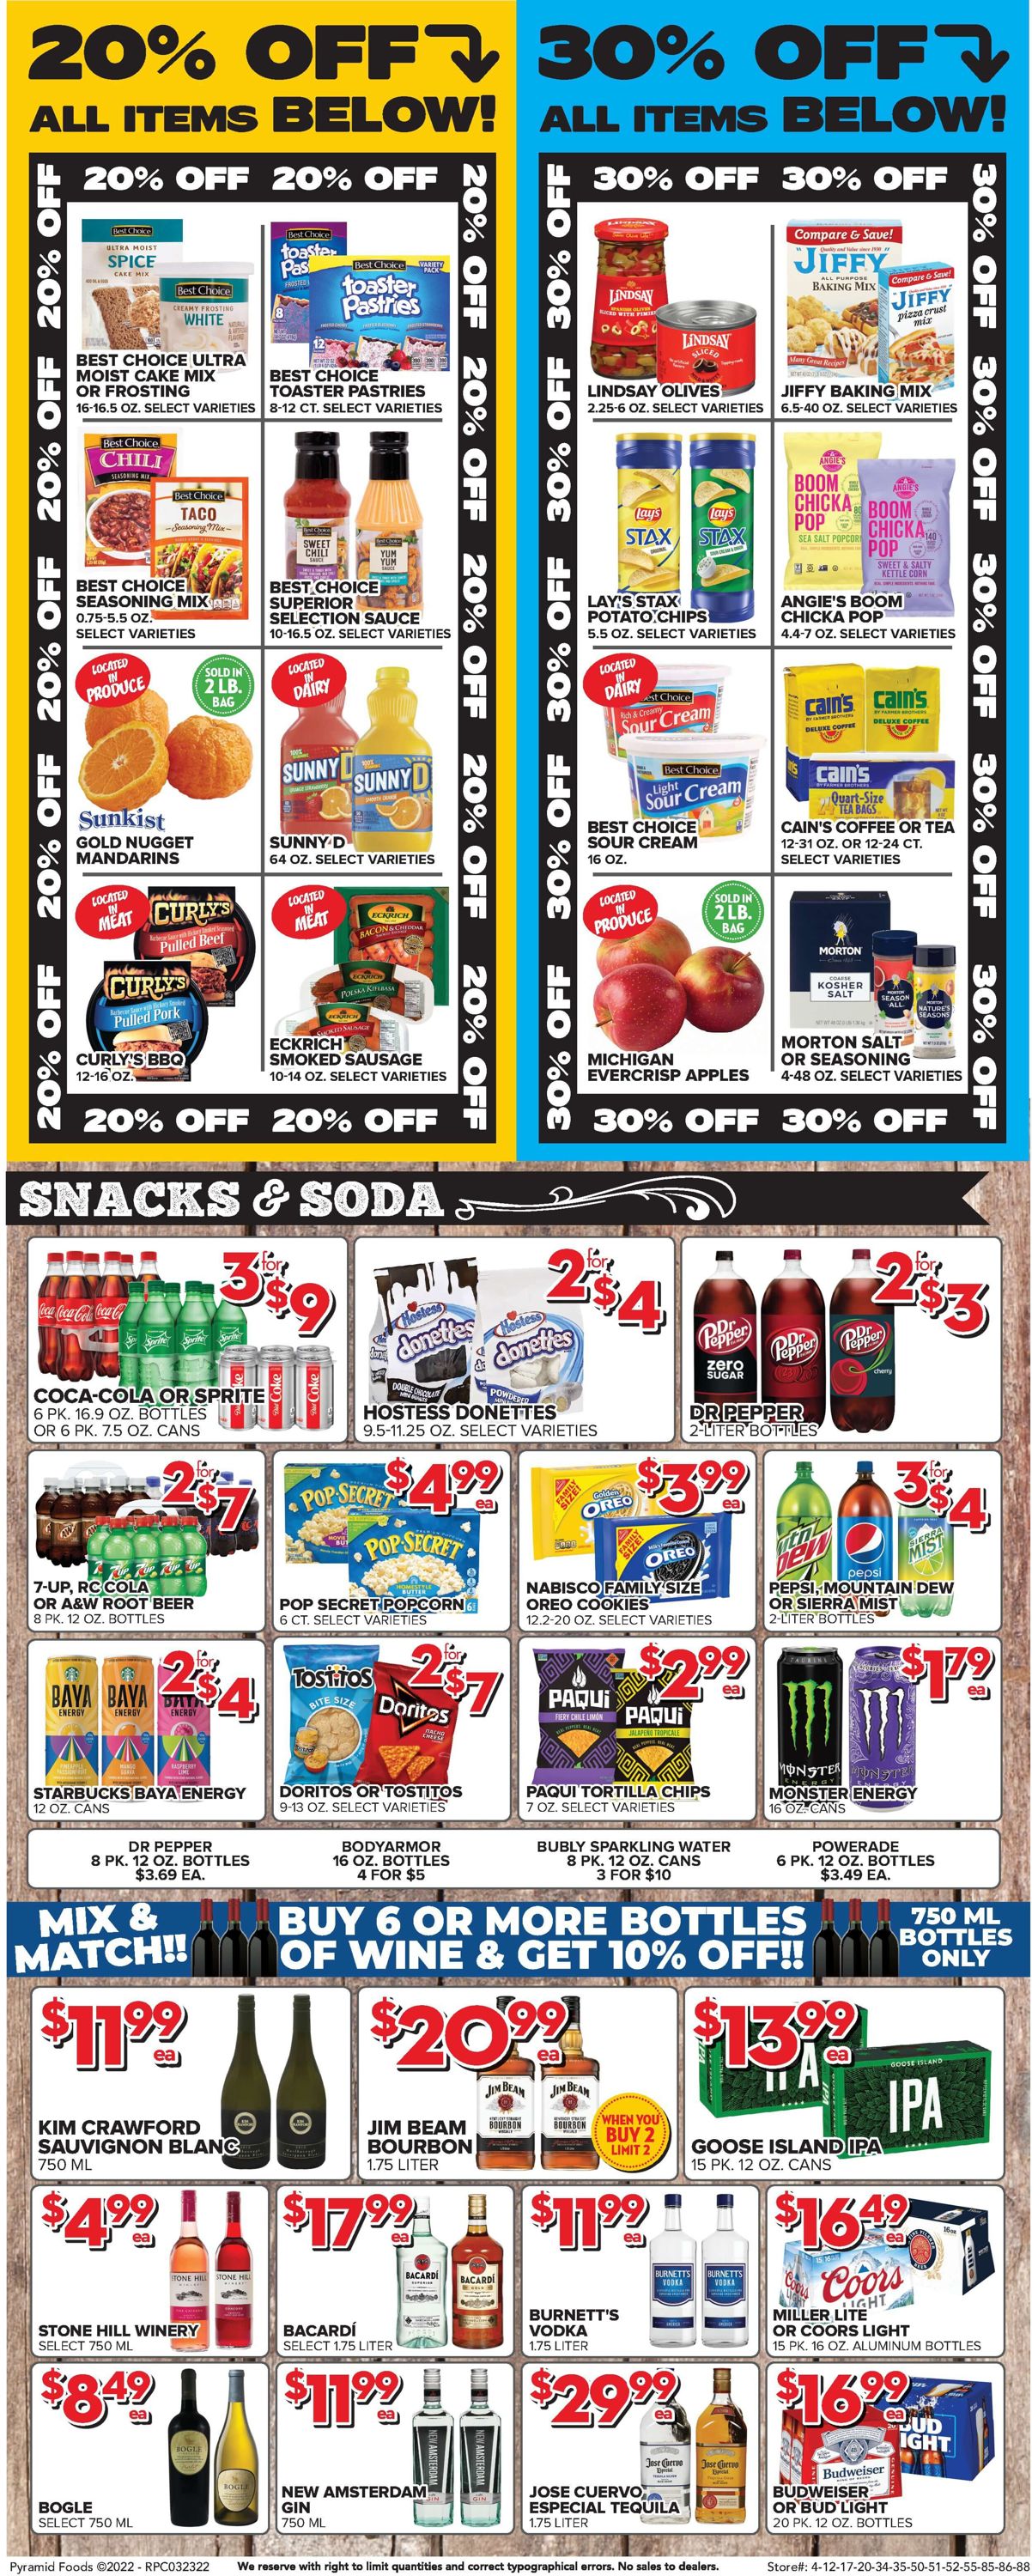 Price Cutter Weekly Ad Circular - valid 03/23-03/29/2022 (Page 6)